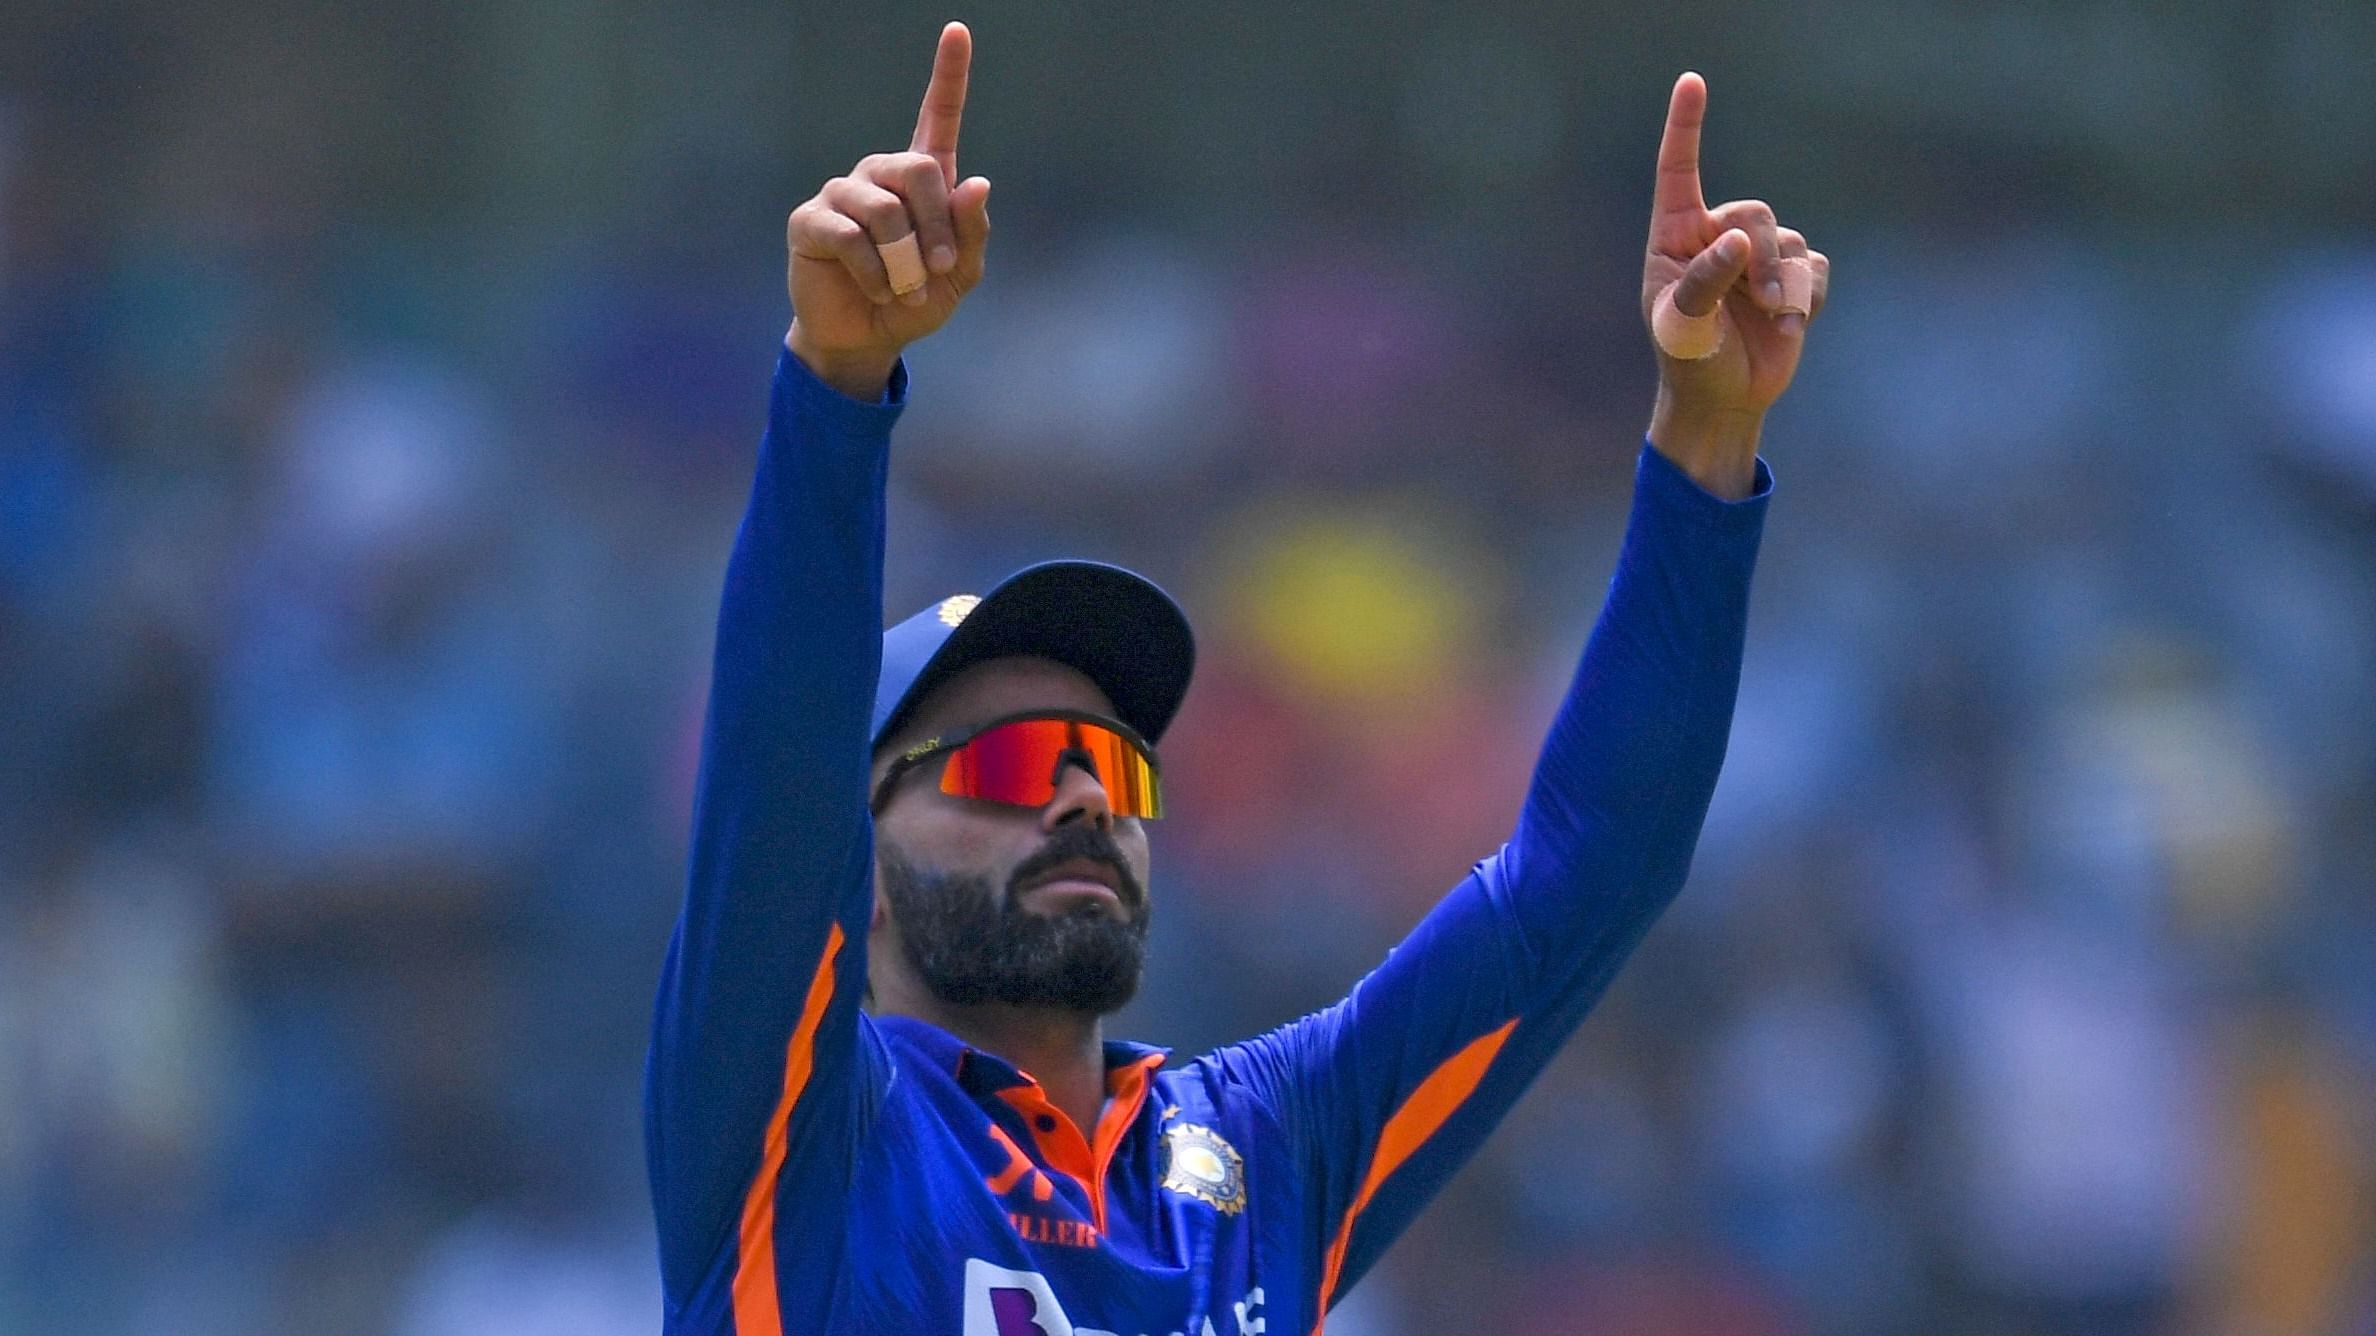  Virat Kohli gestures during the first one-day international (ODI) cricket match between India and Australia at the Wankhede Stadium in Mumbai. Credit: AFP Photo